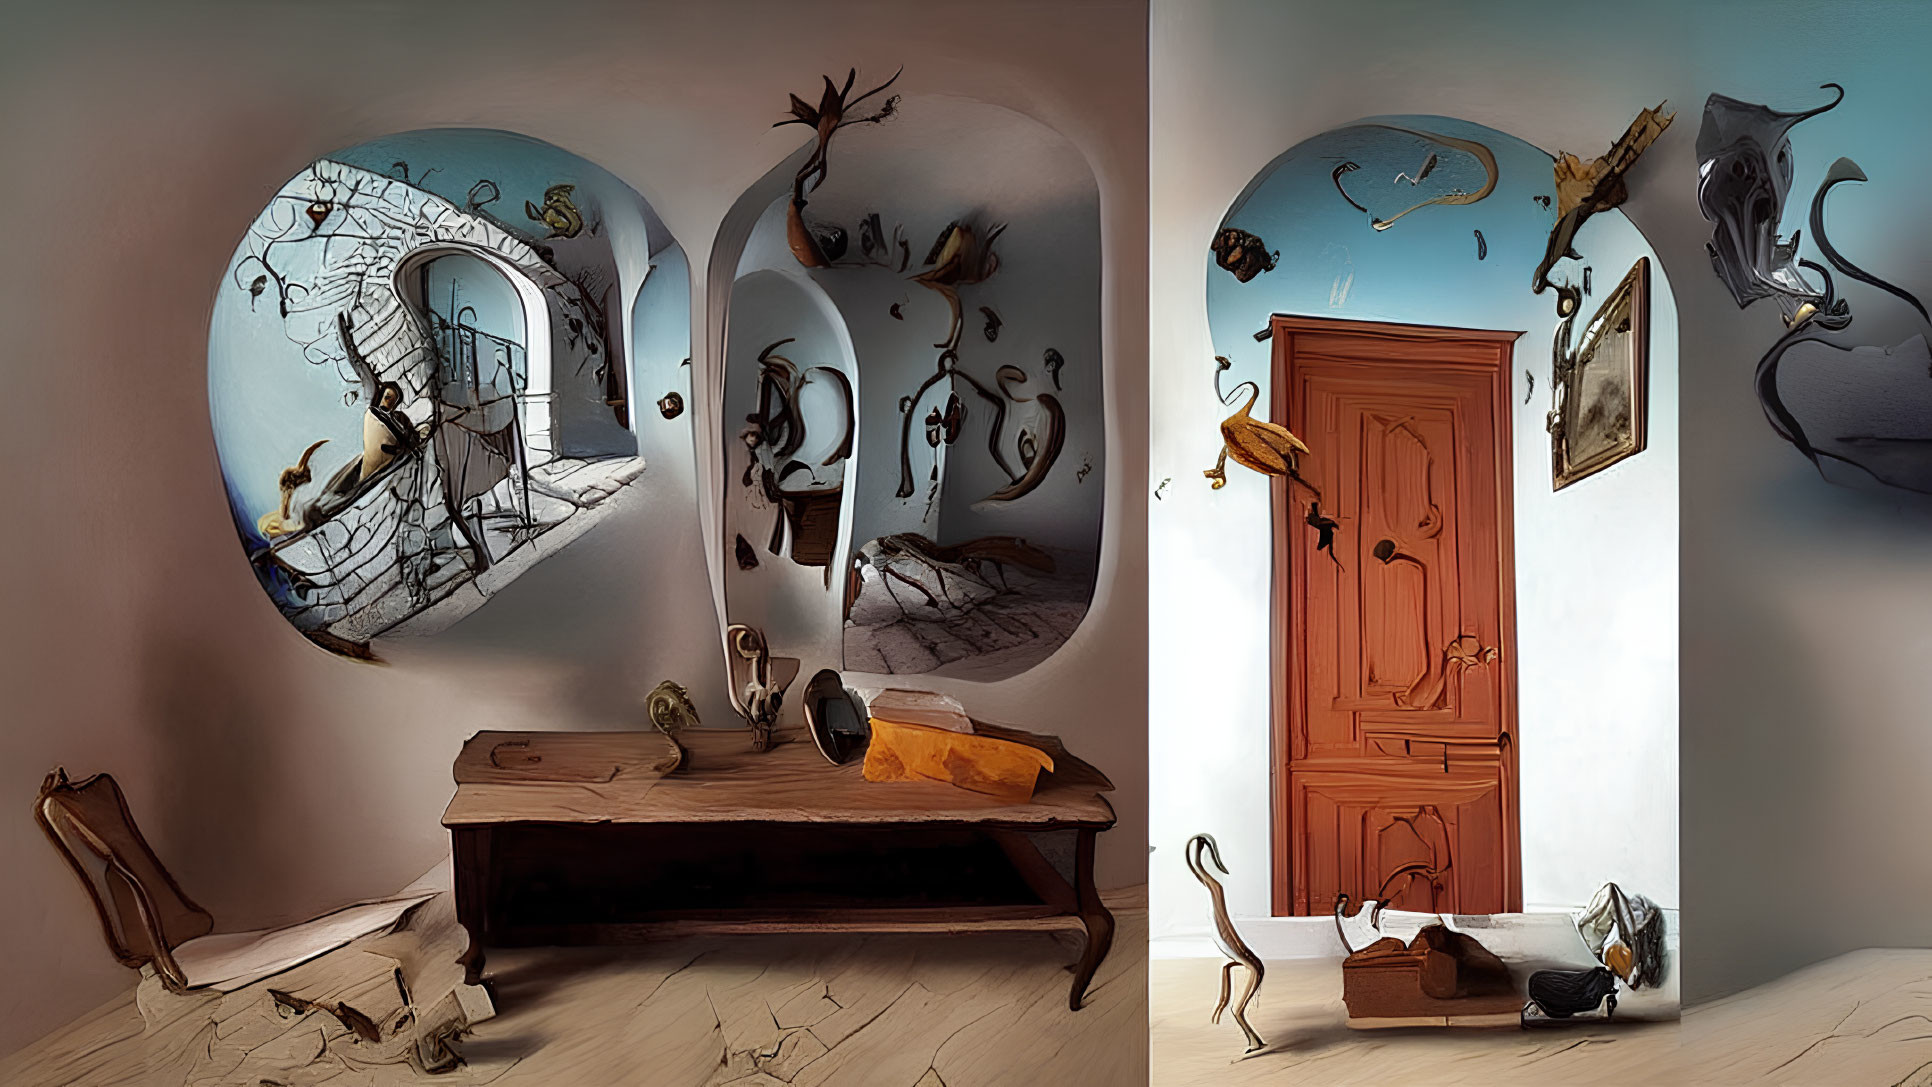 Surreal room with distorted walls, floating musical notes, person on spiral staircase, wooden door